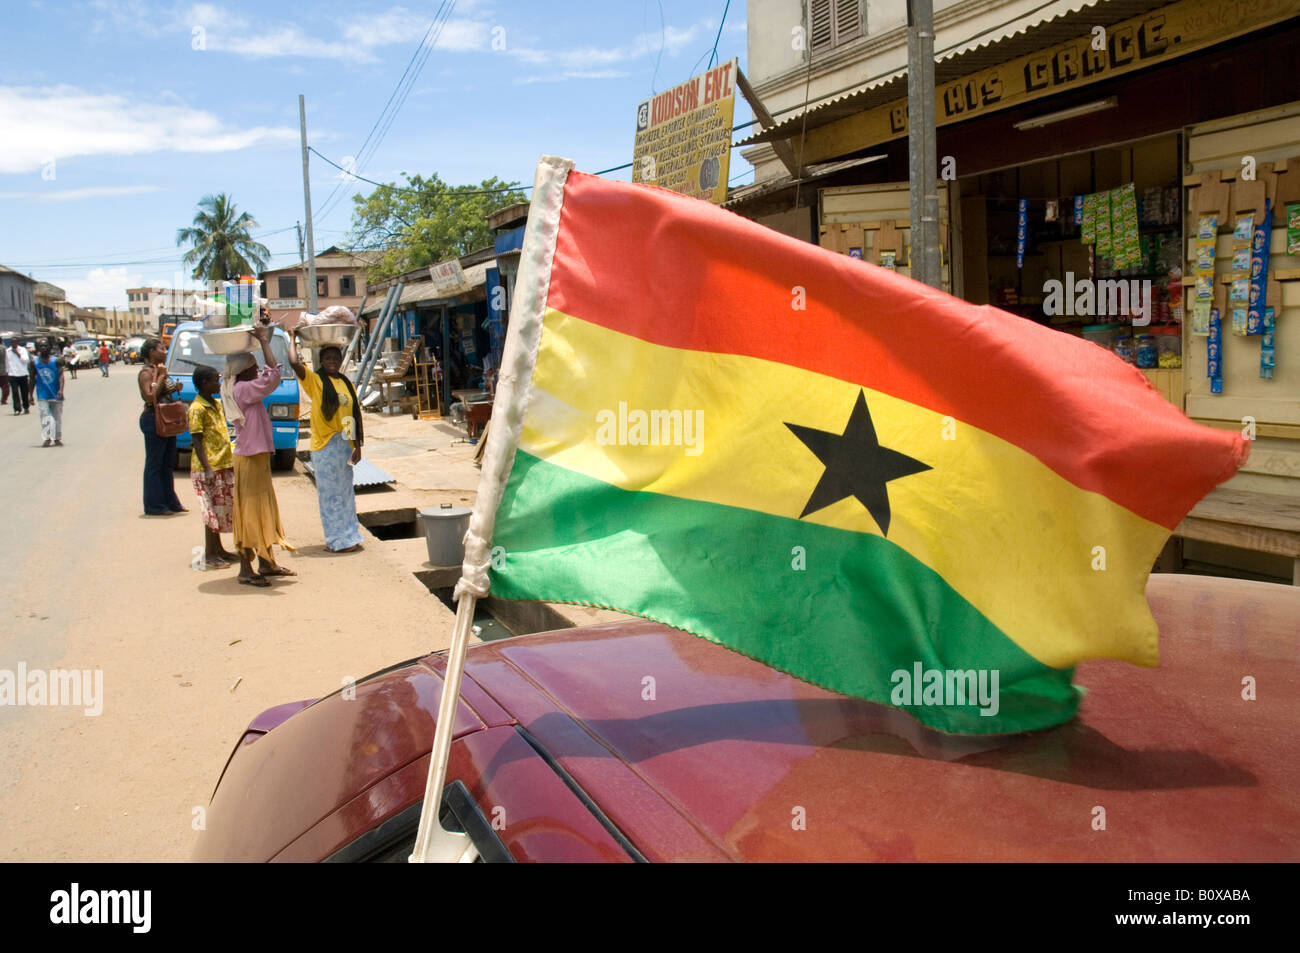 Car with the National flag of Ghana in the streets of Accra Stock Photo